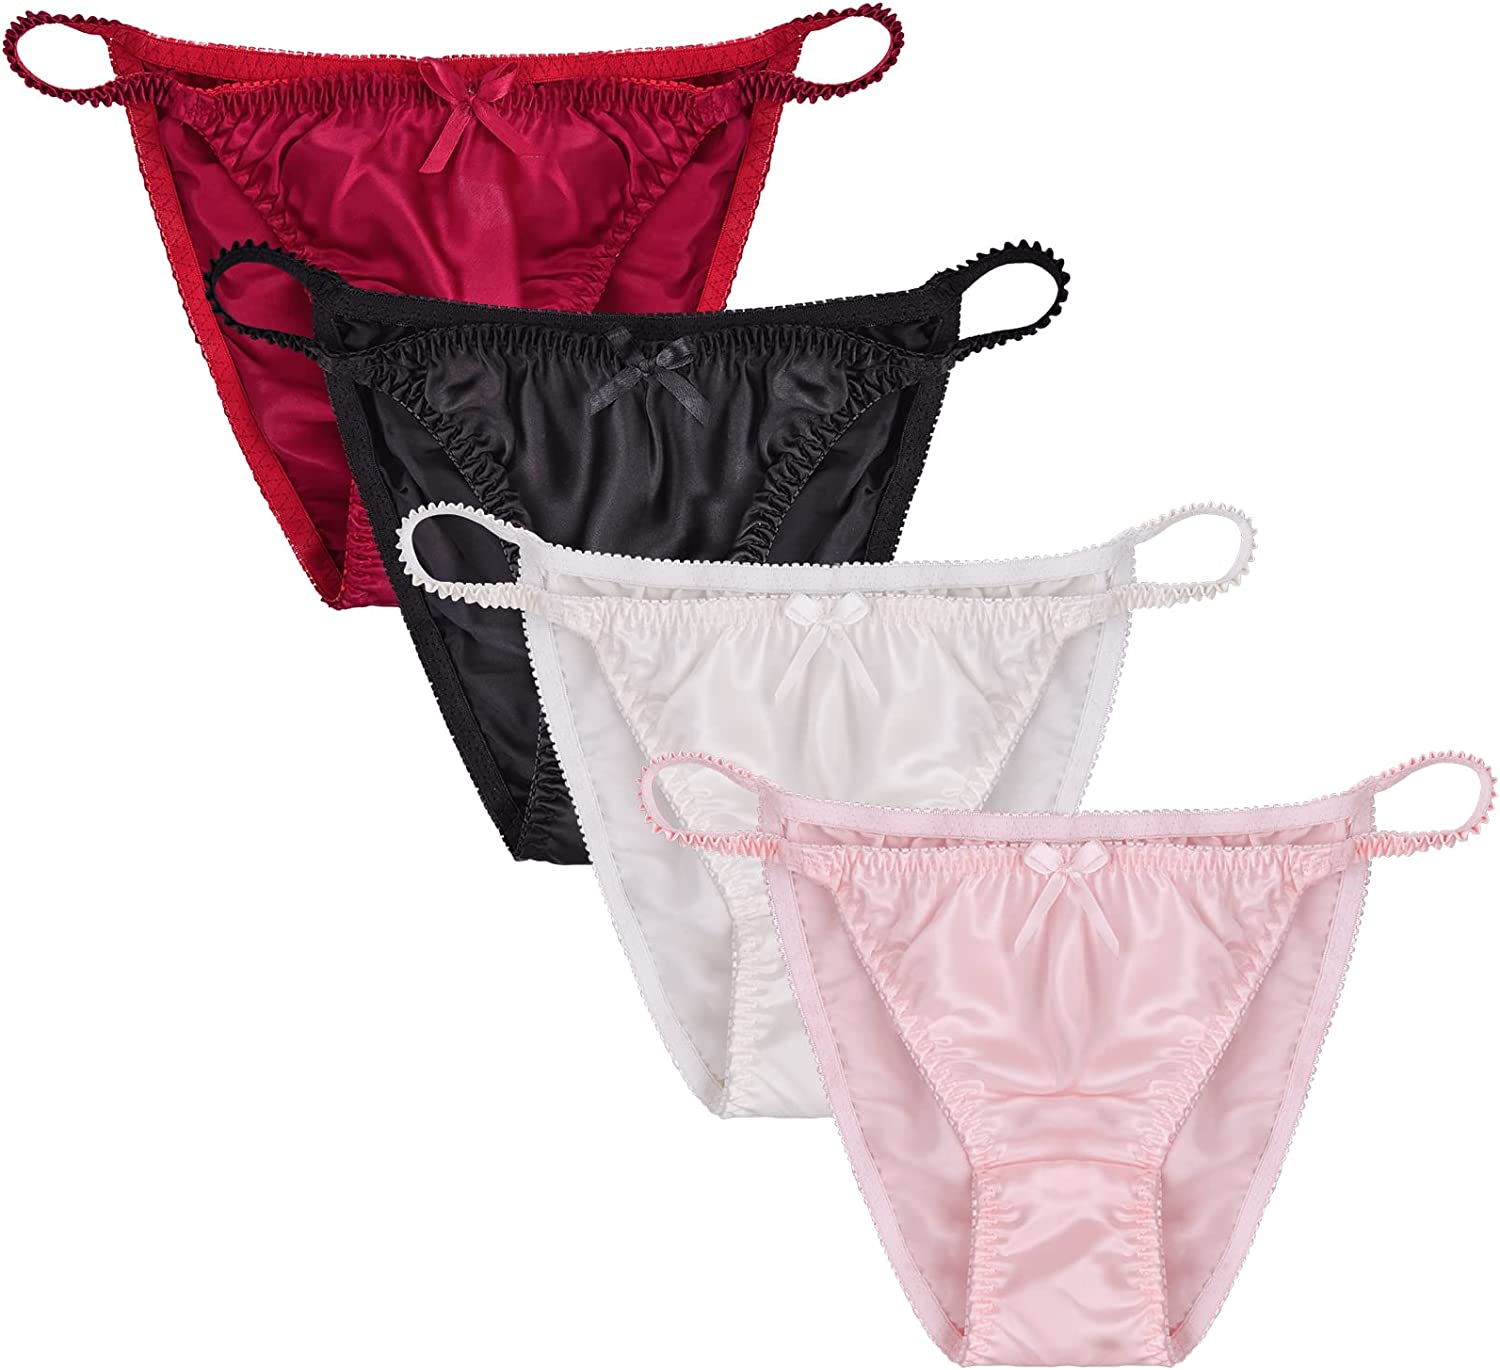  Morvia Variety Panties For Women Pack Sexy Thong